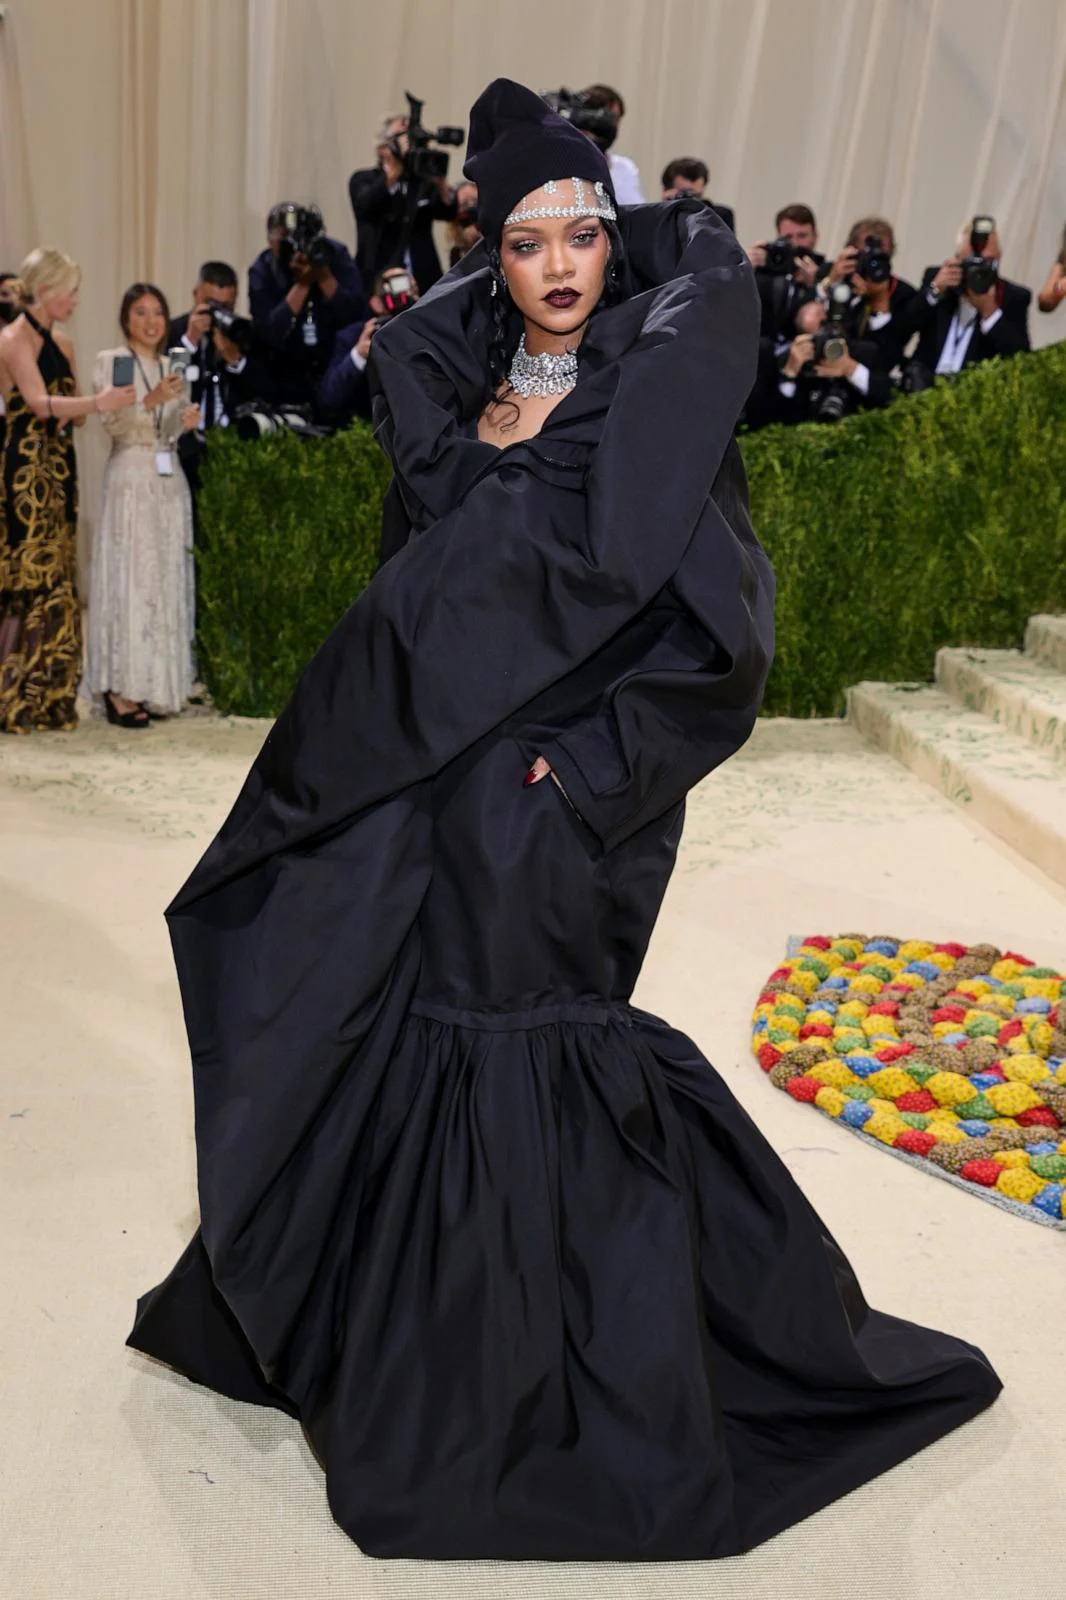 PHOTO: Rihanna attends The 2021 Met Gala Celebrating In America: A Lexicon Of Fashion at Metropolitan Museum of Art on Sept. 13, 2021 in New York City.  (Theo Wargo/Getty Images)